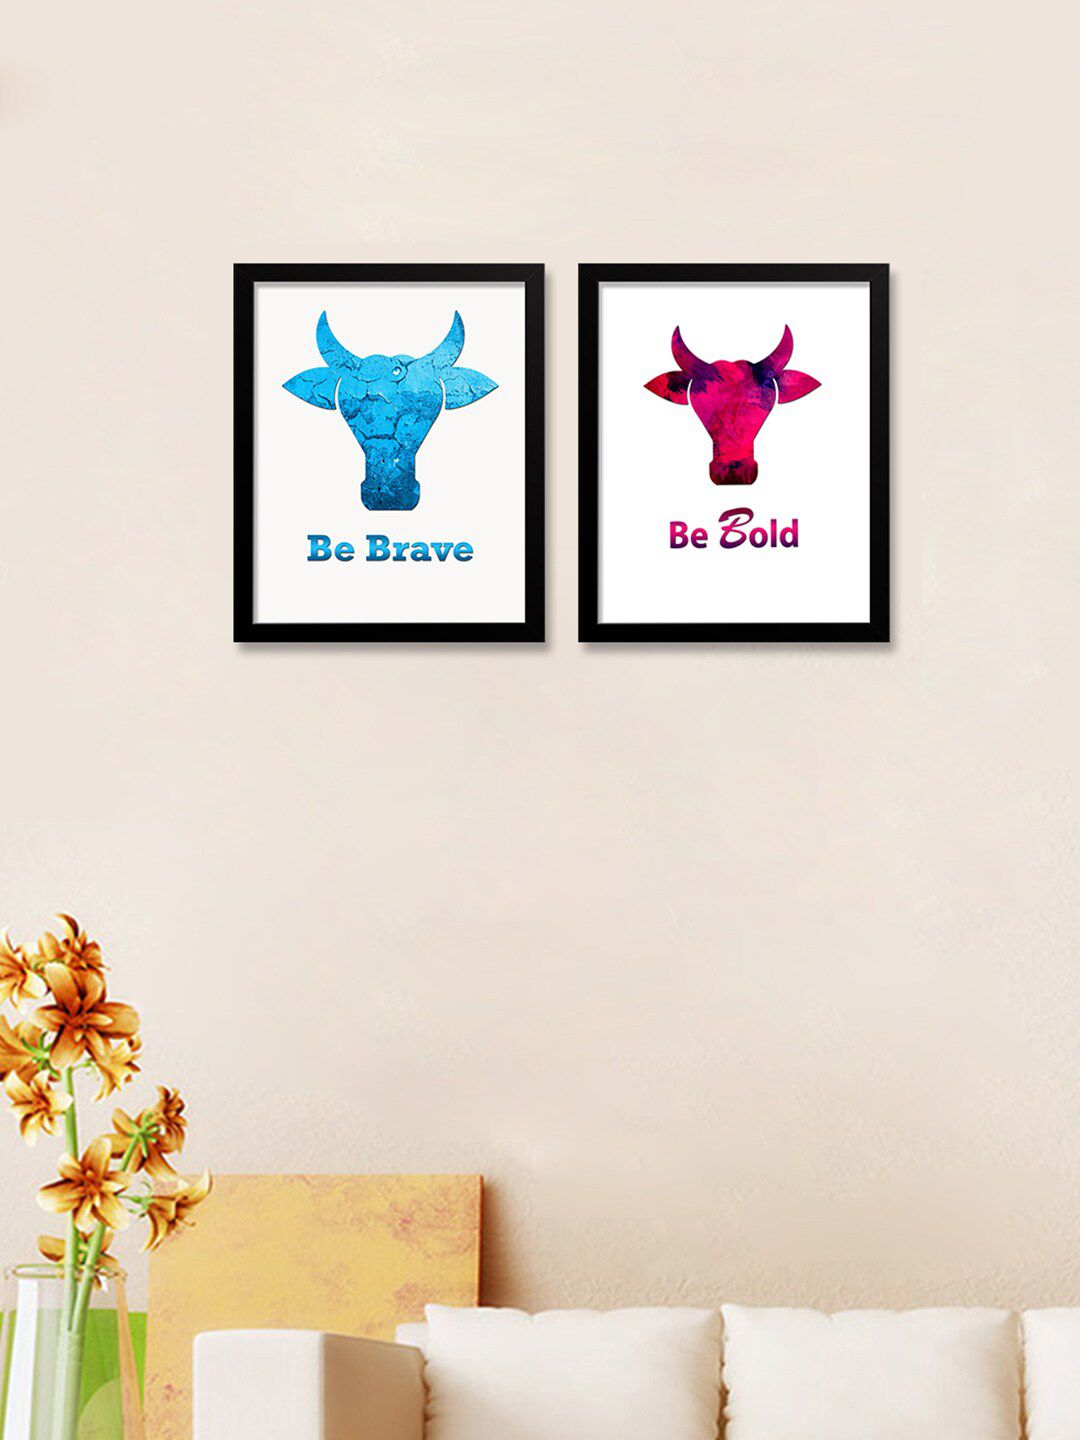 WALLMANTRA Set Of 2 Printed Framed Wall Art Price in India